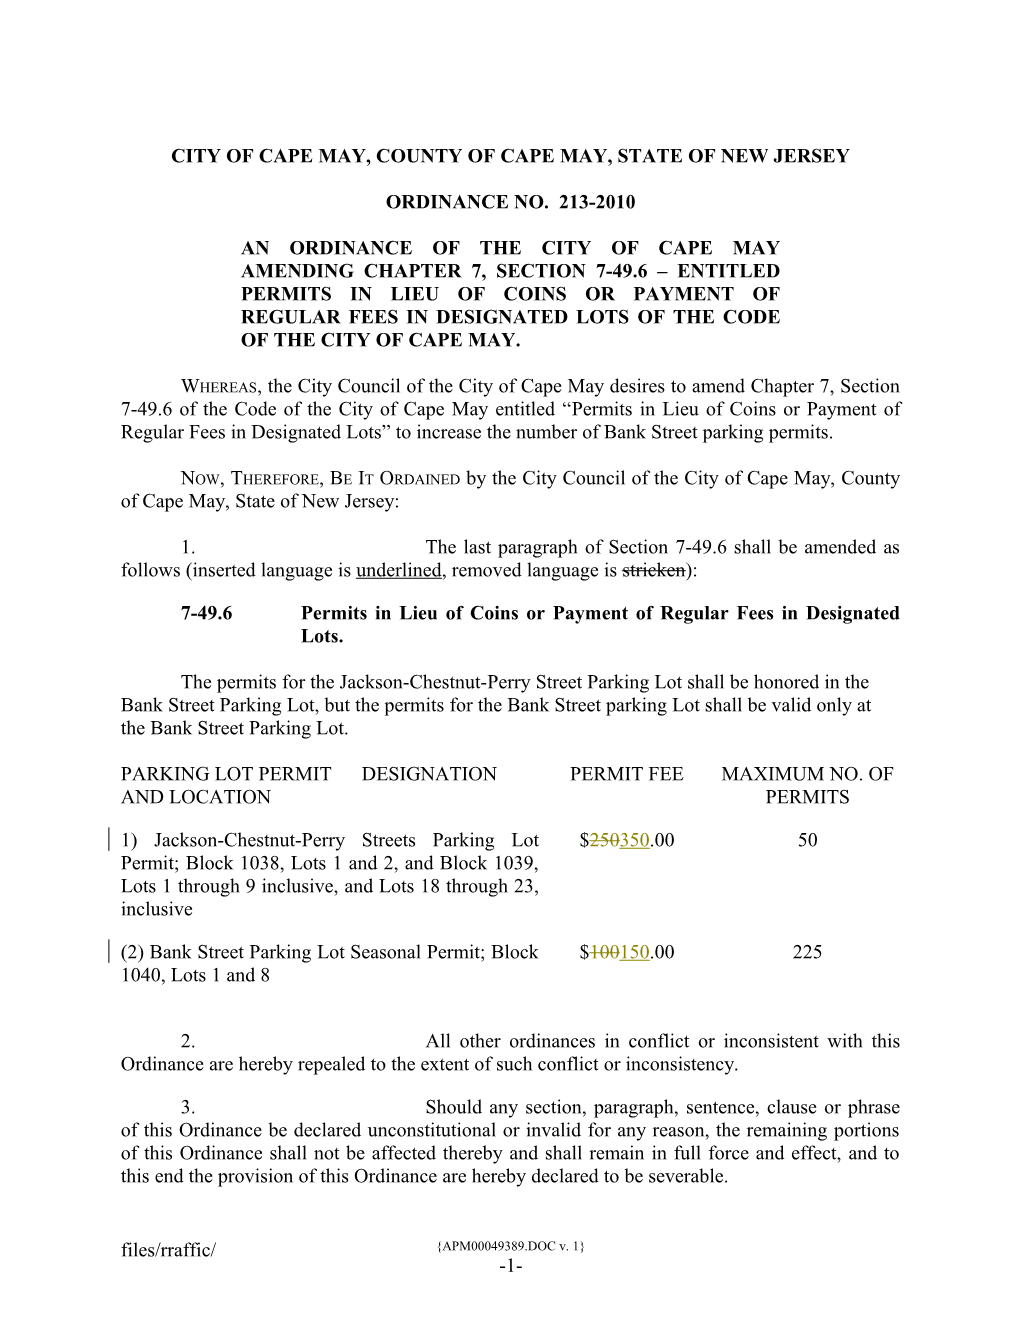 CM Ordinance Amending Section 7-49.6 Permits at Bank Street (00049389;1)